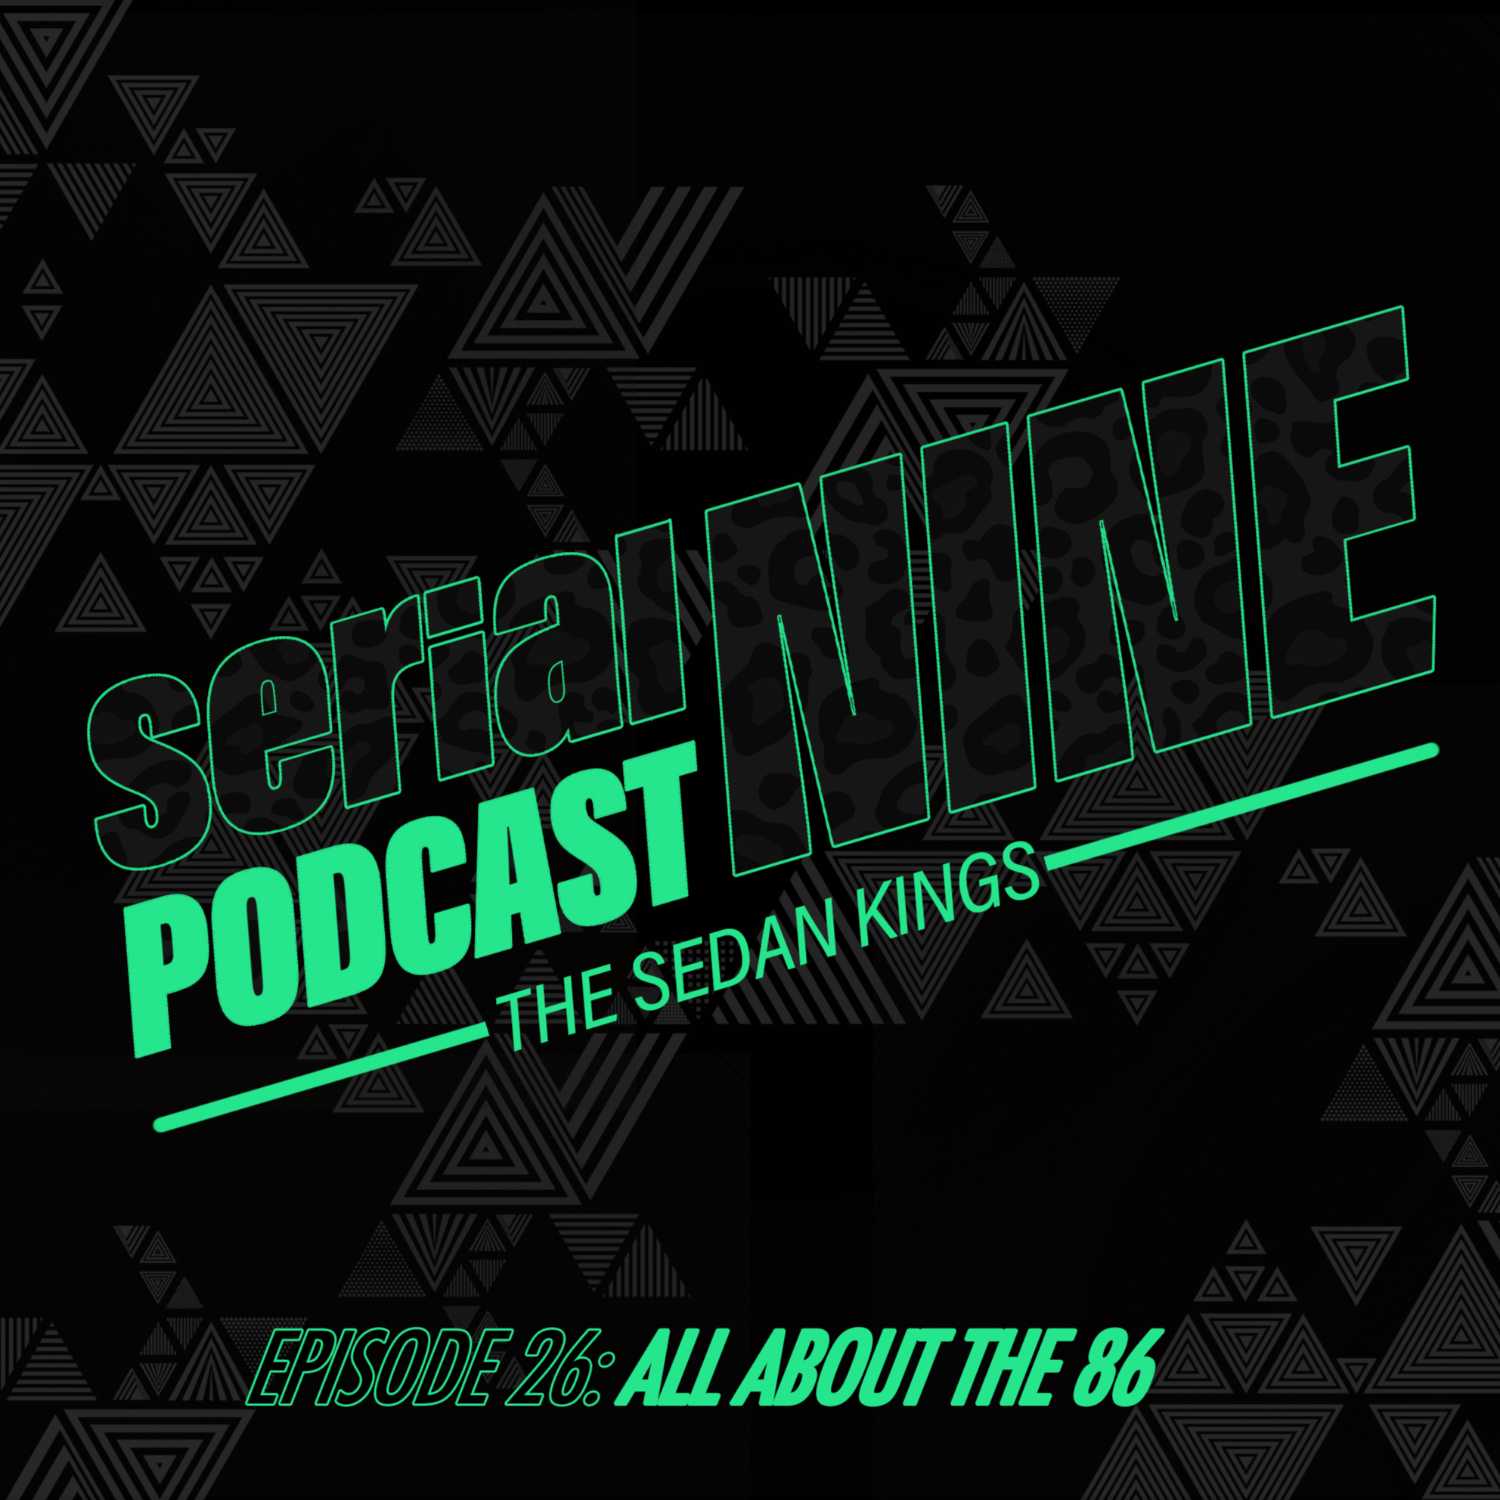 SerialPodcastNine  Episode 26 All about the 86